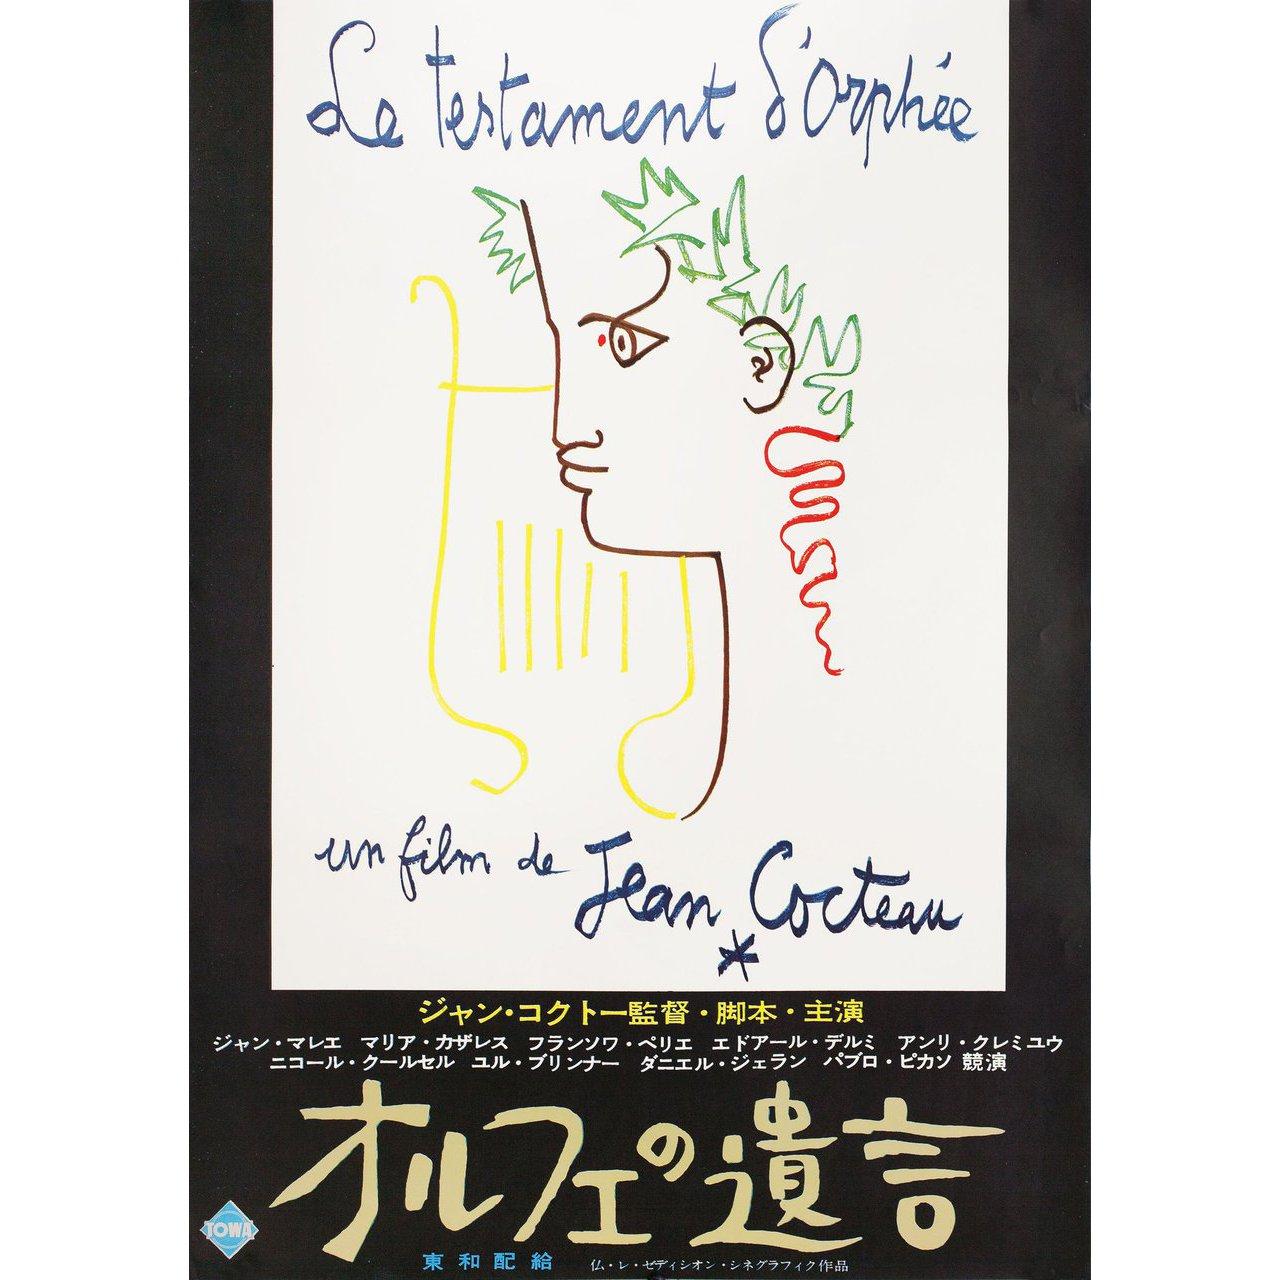 Original 1962 Japanese B2 poster by Jean Cocteau for the first Japanese theatrical release of the film Testament of Orpheus (Le testament d'Orphee) directed by Jean Cocteau with Jean Cocteau. Very good-fine condition, rolled. Please note: The size